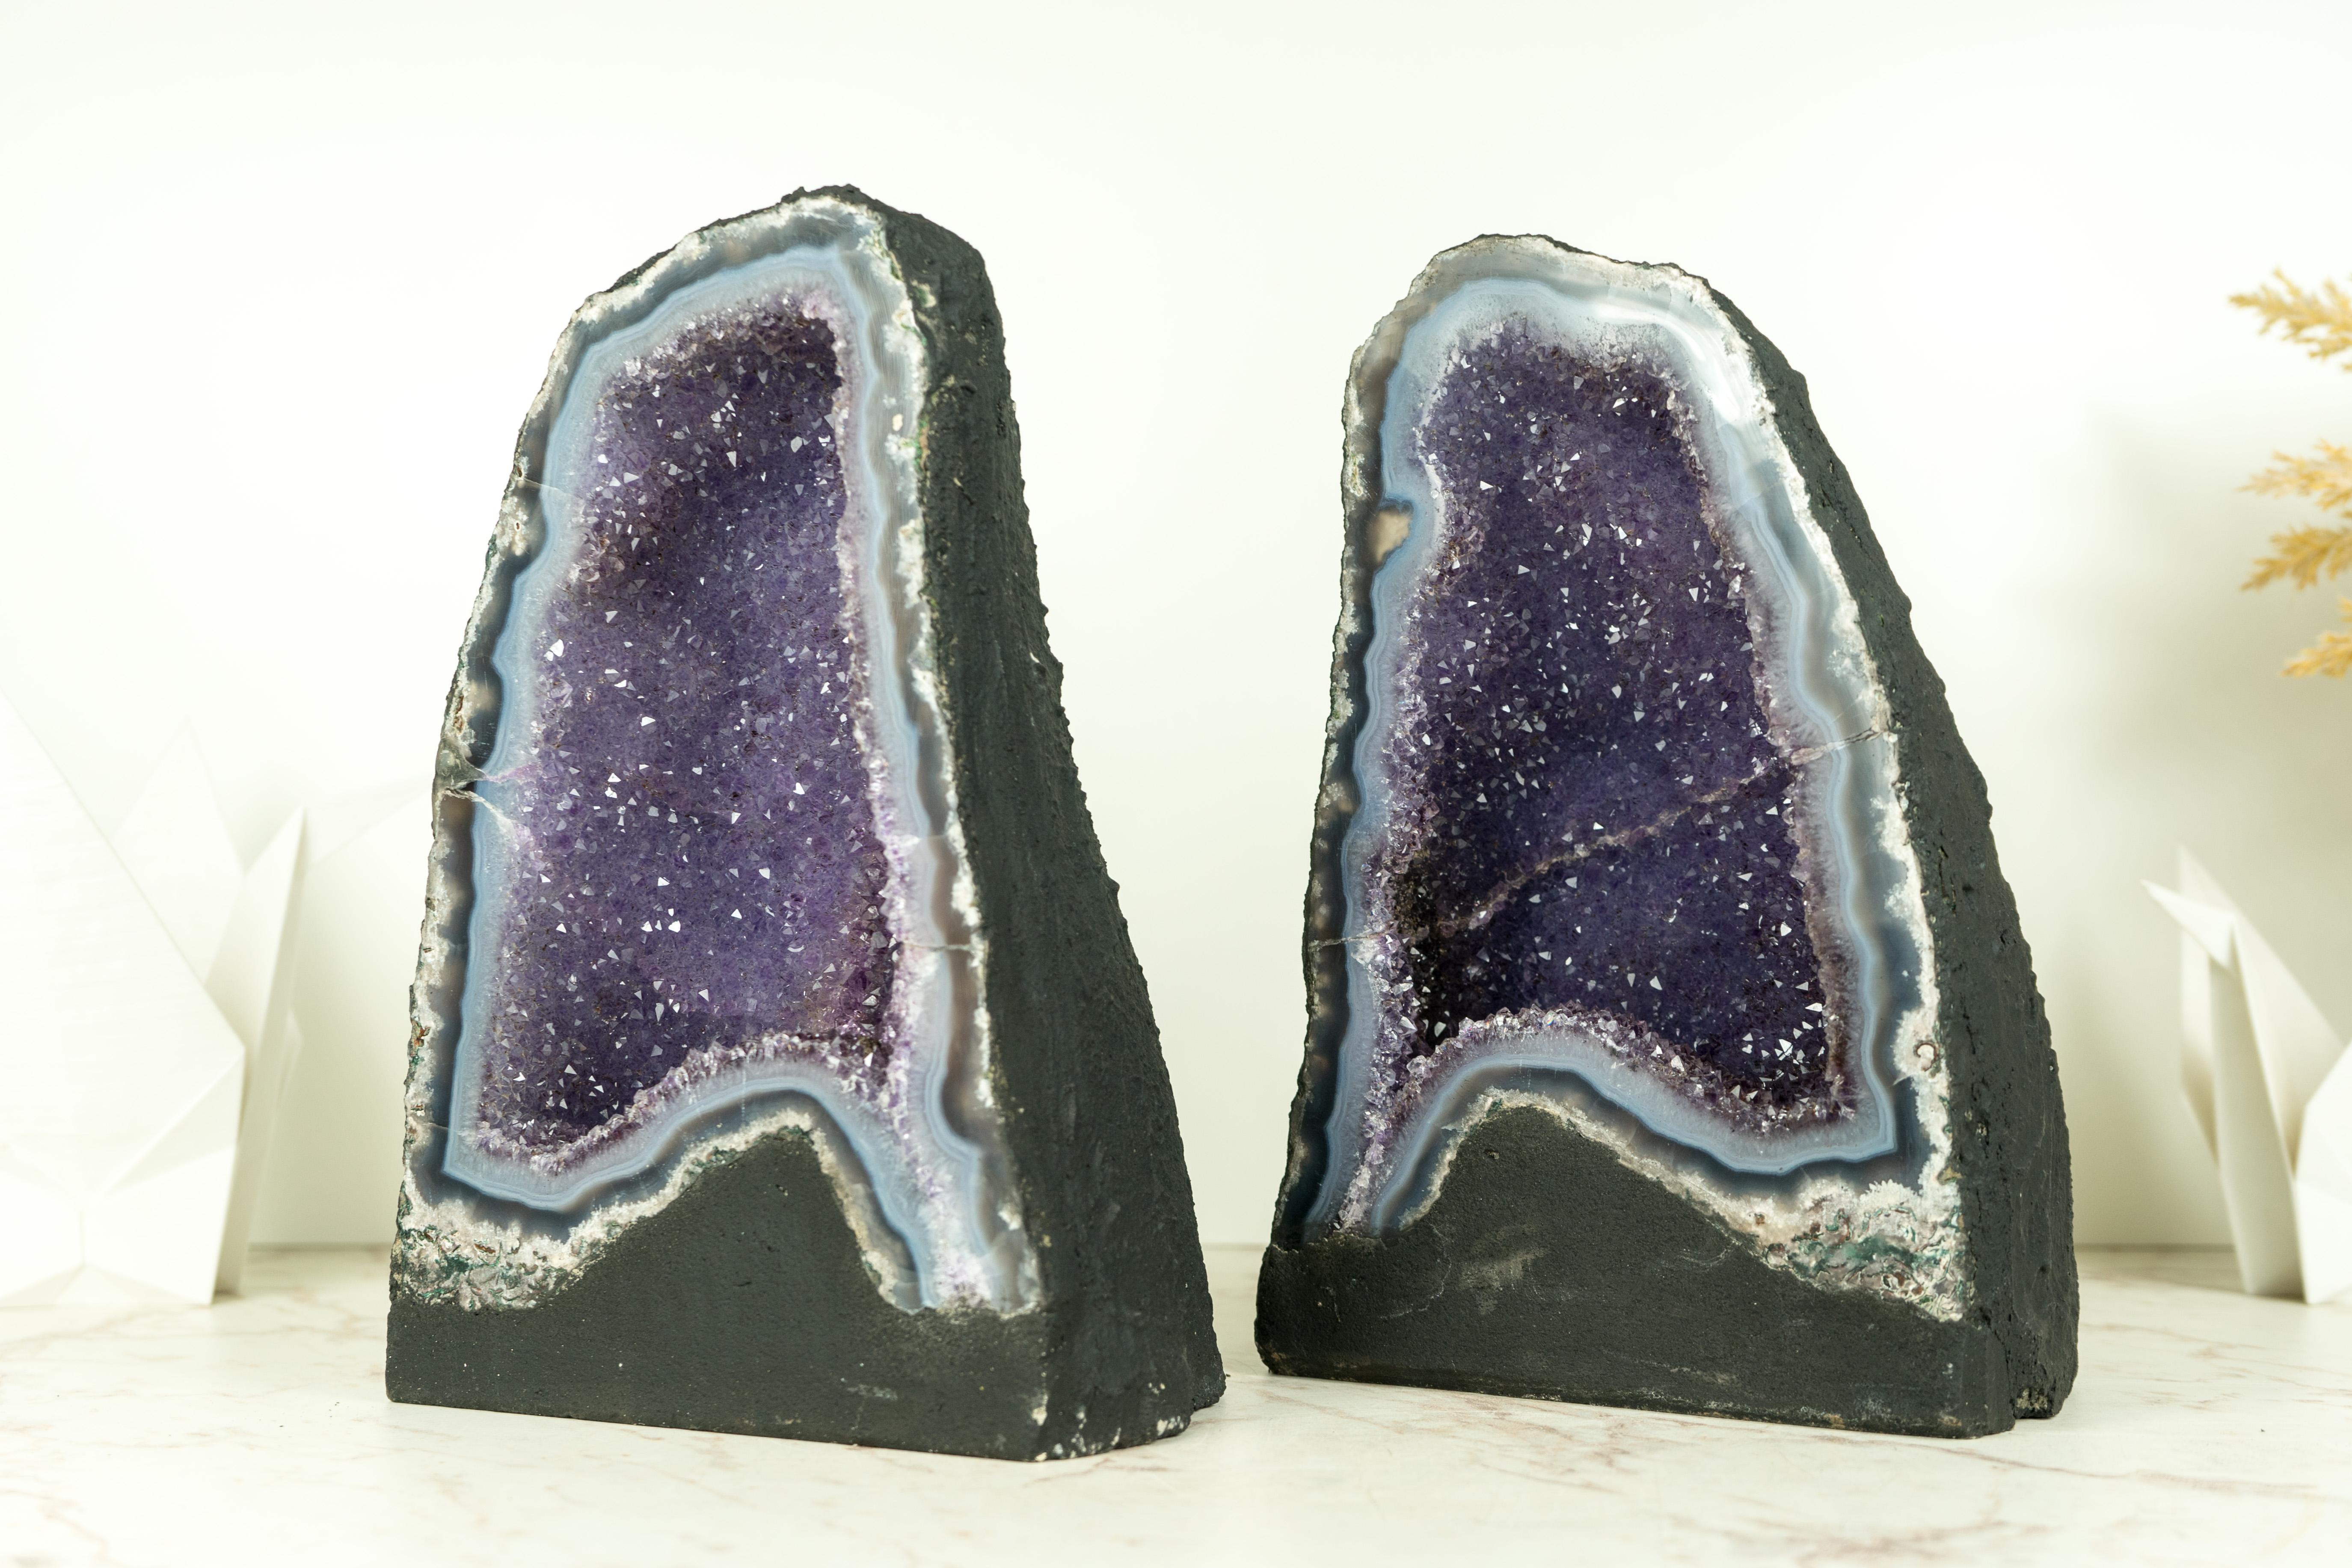 Pair of High-Grade Small Blue Lace Agate Geodes with Sparkly Lavender Amethyst For Sale 2